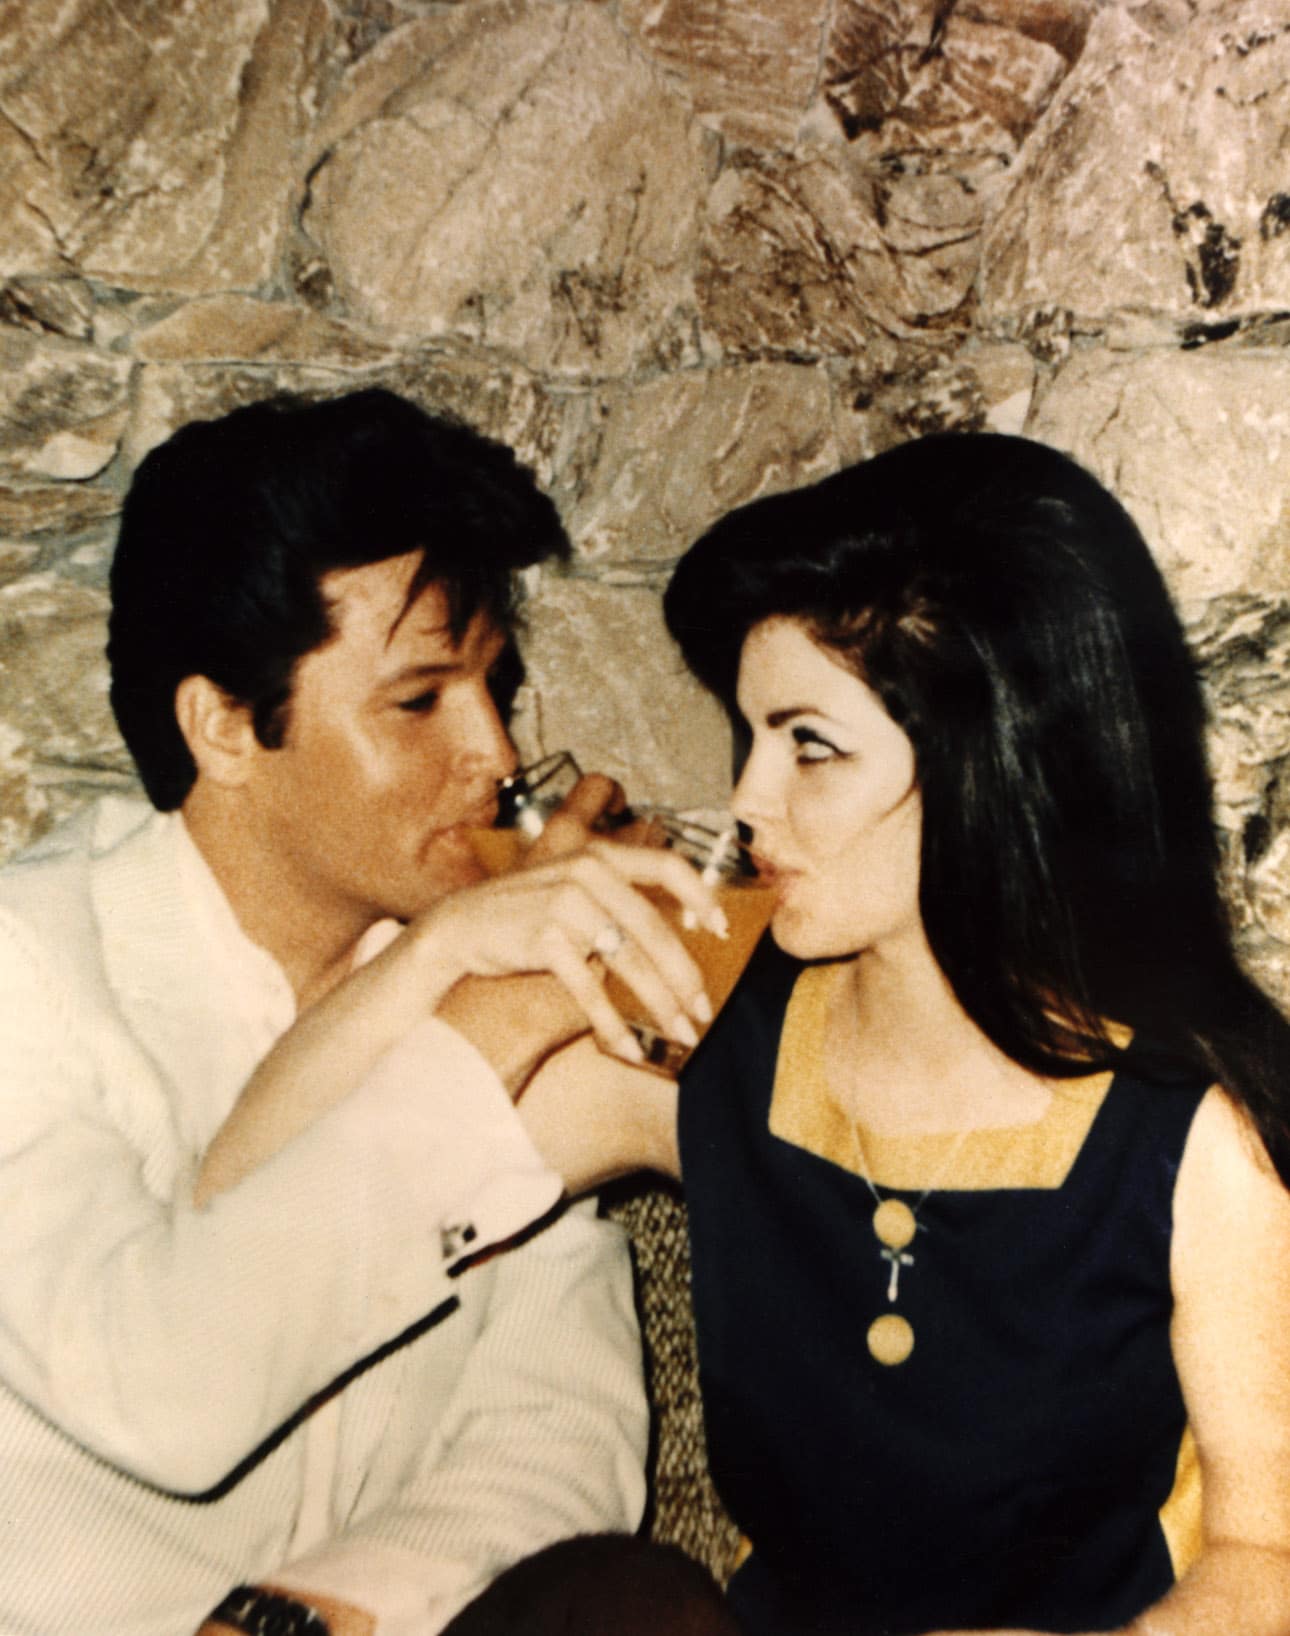 Newlyweds ELVIS PRESLEY and PRISCILLA PRESLEY toast each other after the ceremony, 1967